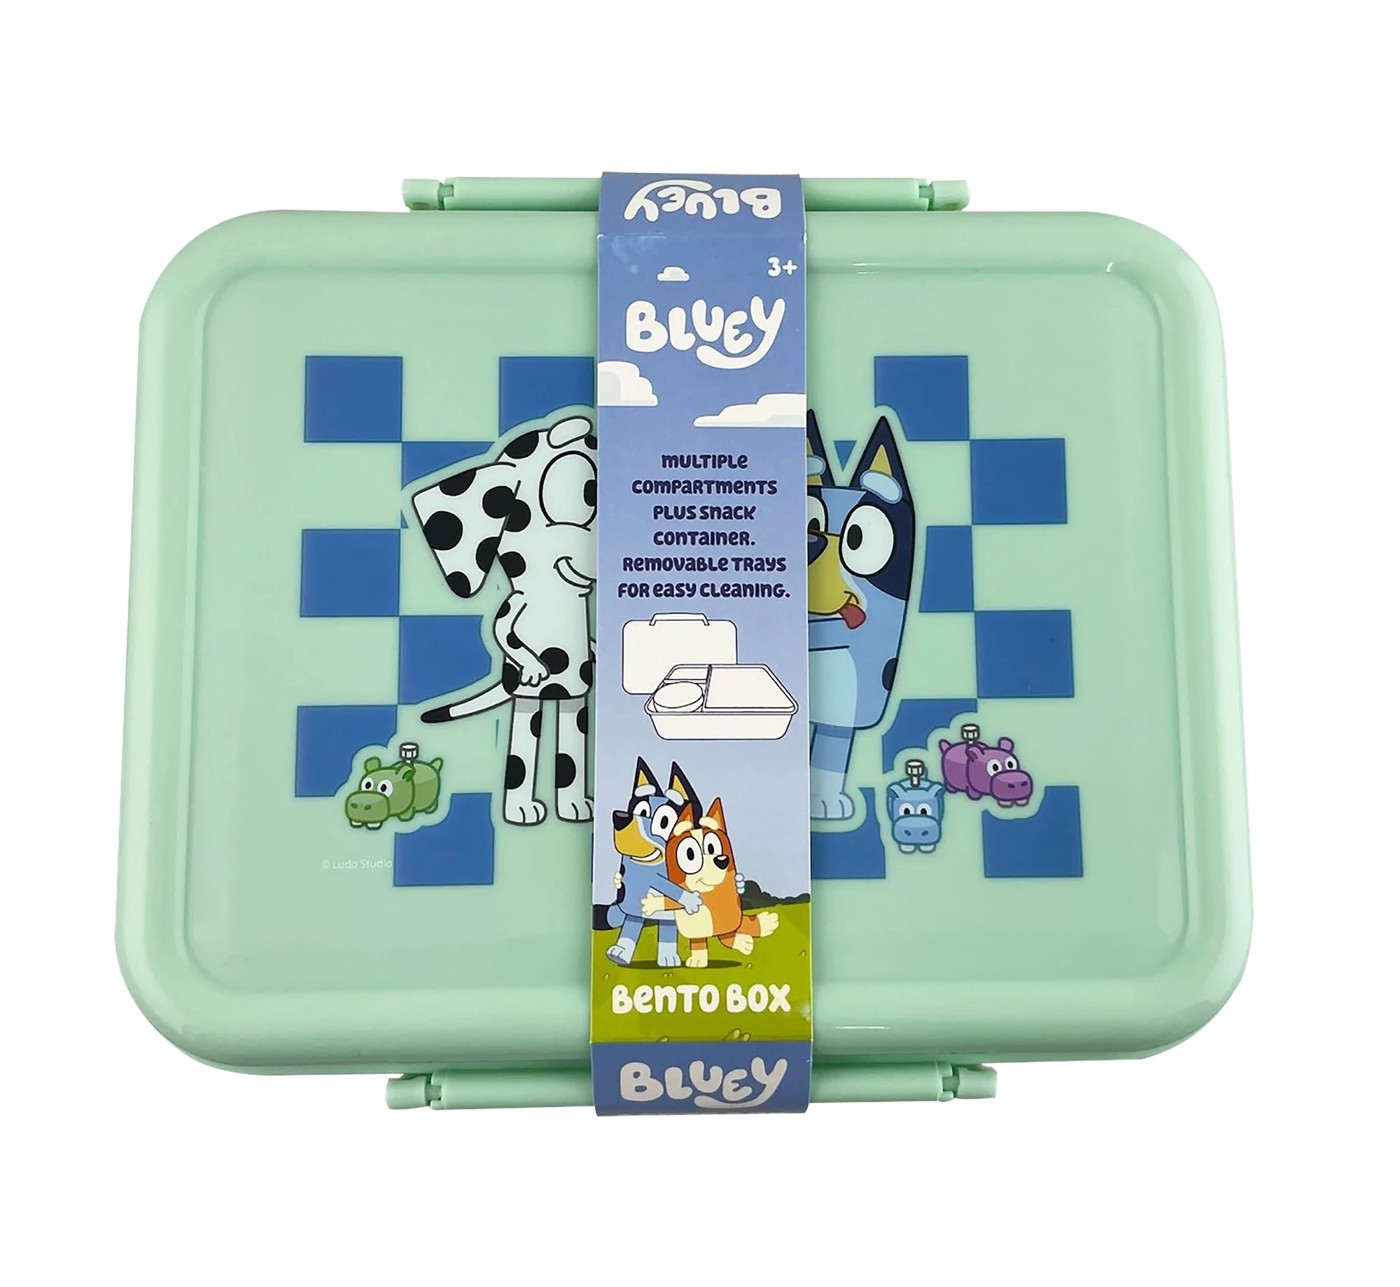 Smiggle - Spend lunchtime with your favourite siblings Bluey & Bingo! Our  Bluey bento box & double deck lunchbox are the ideal size for your  lunchtime snacks. There's even room for cheese